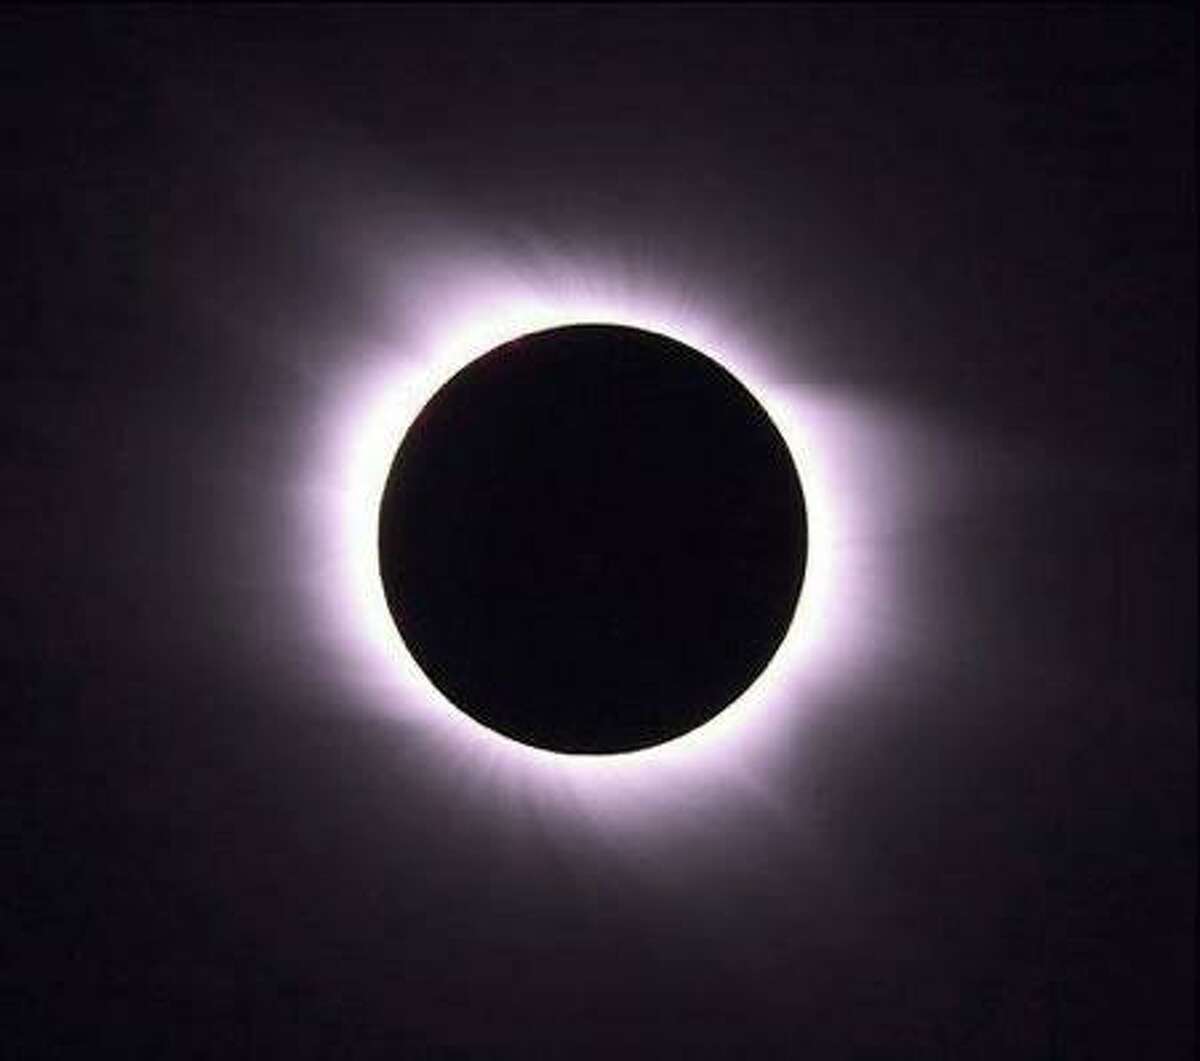 Monday, Aug. 21, a total solar eclipse will occur. It will be visible across North America.